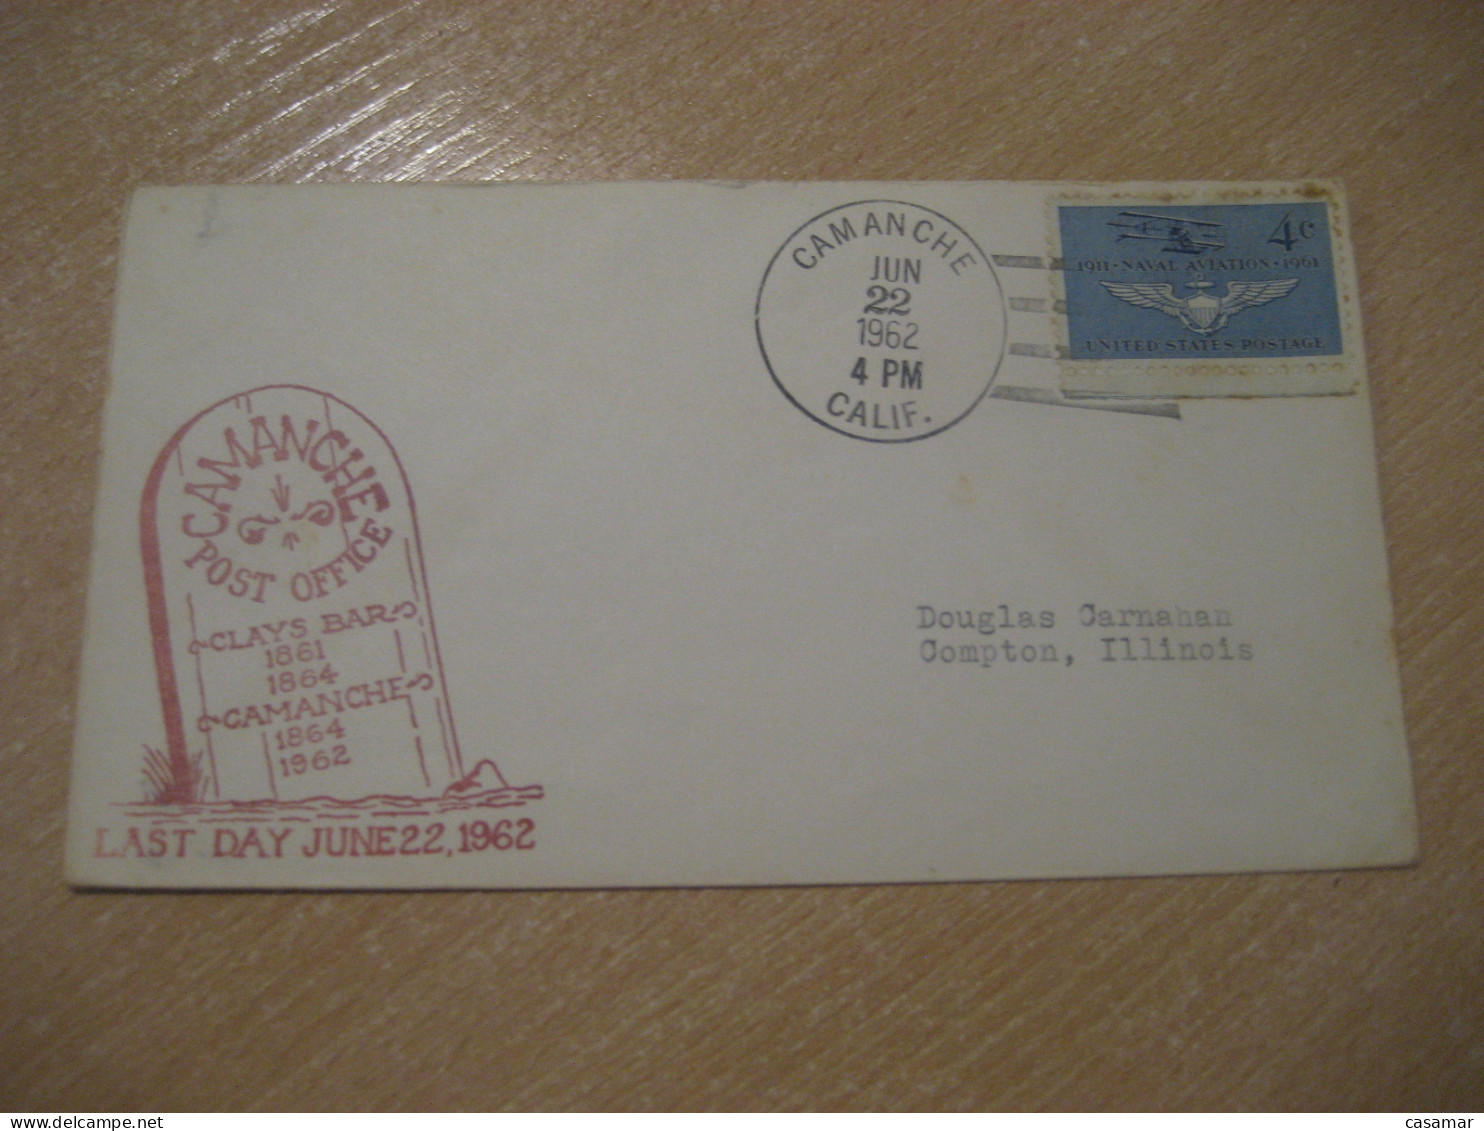 CAMANCHE 1962 Post Office Clays Bar Last Day American Indians Indian Cancel Cover USA Indigenous Native History - Indianen